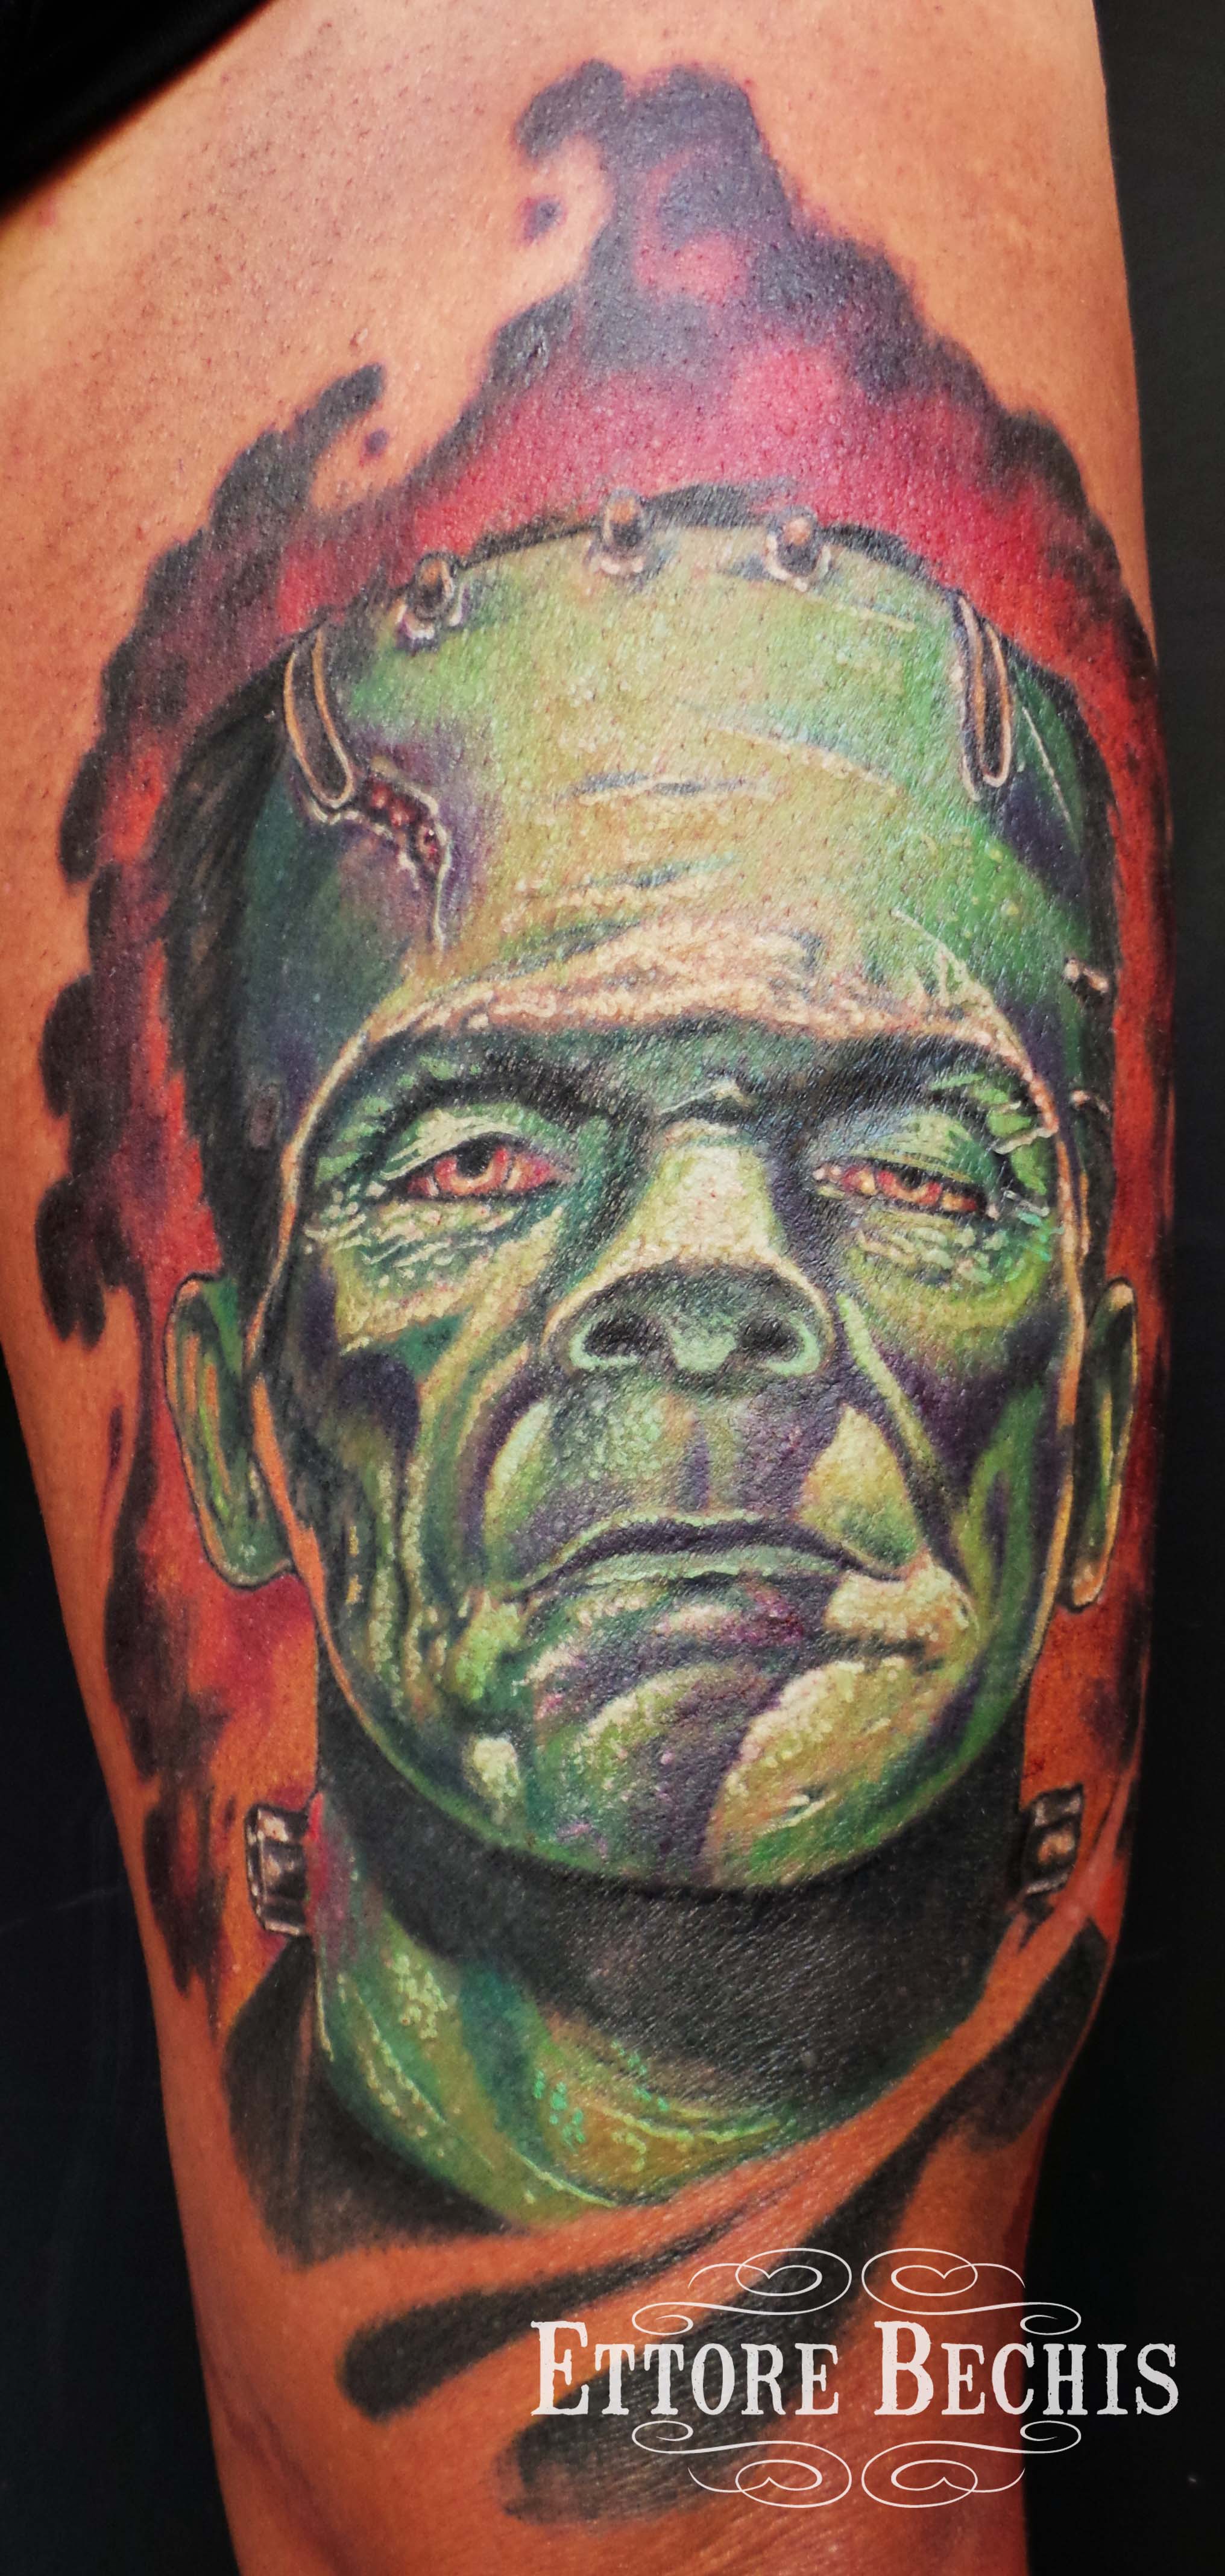 Frankenstein tattoo portrait tattoo  done by Ettore Bechis at Ettore Bechis Tattoo Studio. The only private tattoo studio in Miami Beach,miami tattoo artists,art,tattoo,design,tattoo portraits,bodyart,realism,tattoo galleries,tattooed,tattoist,tattoo studio,tattoo shop,tattoo convention,tattoo parlors,tattoo picture design,inked,best tattoo shop in Miami